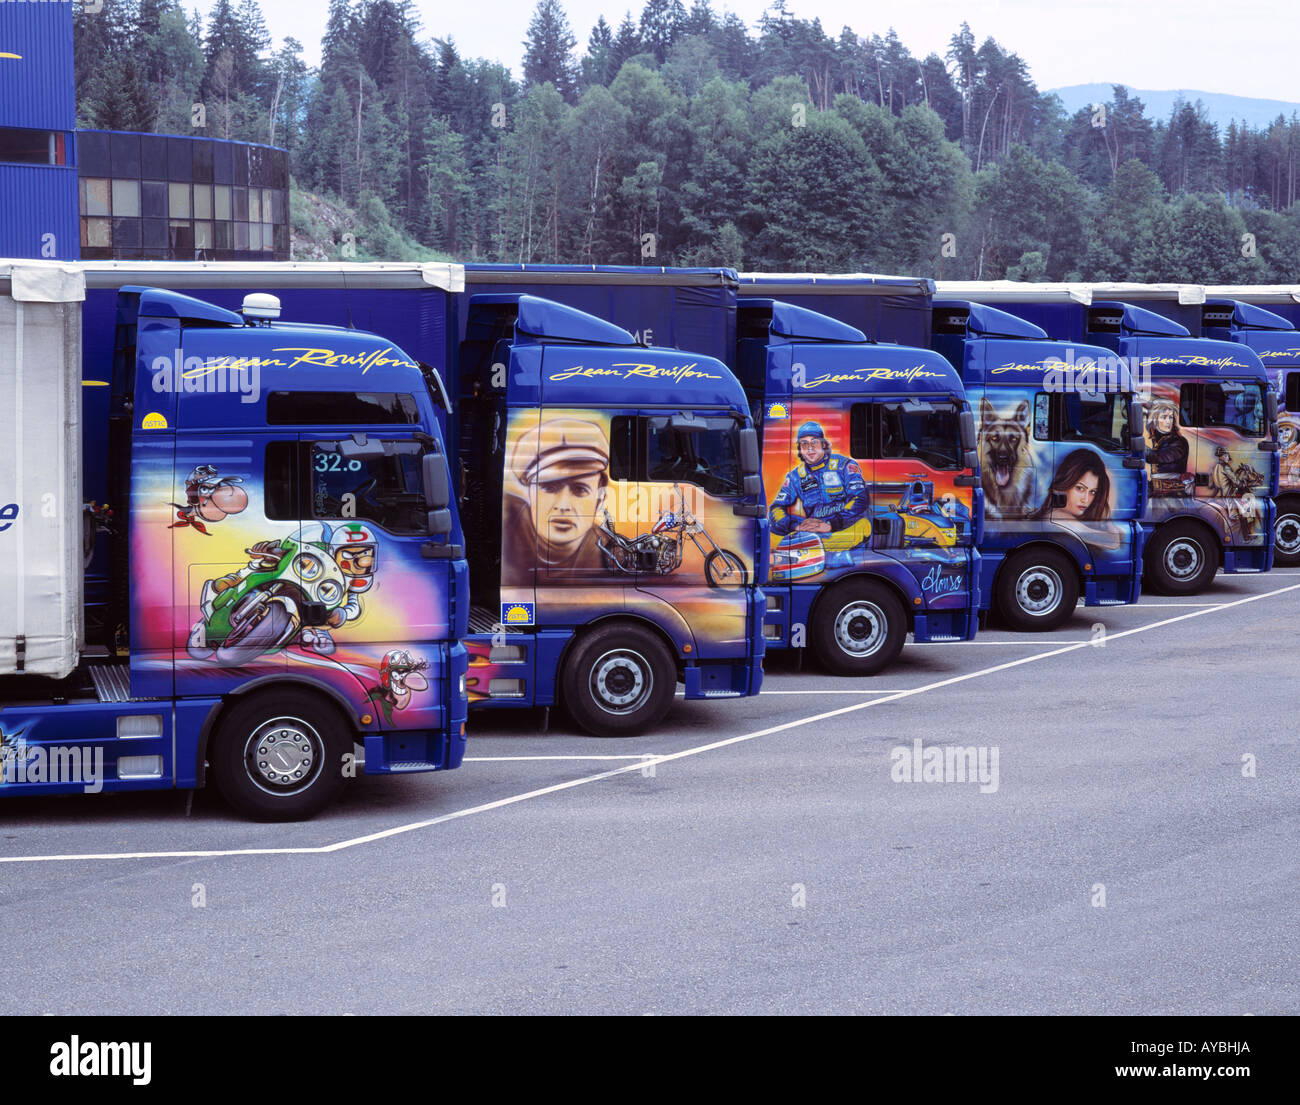 TRANSPORT DECORATED TRUCKS TLINE OF 5 PARKED JEAN ROUILLON TRANSPORT Stock Photo